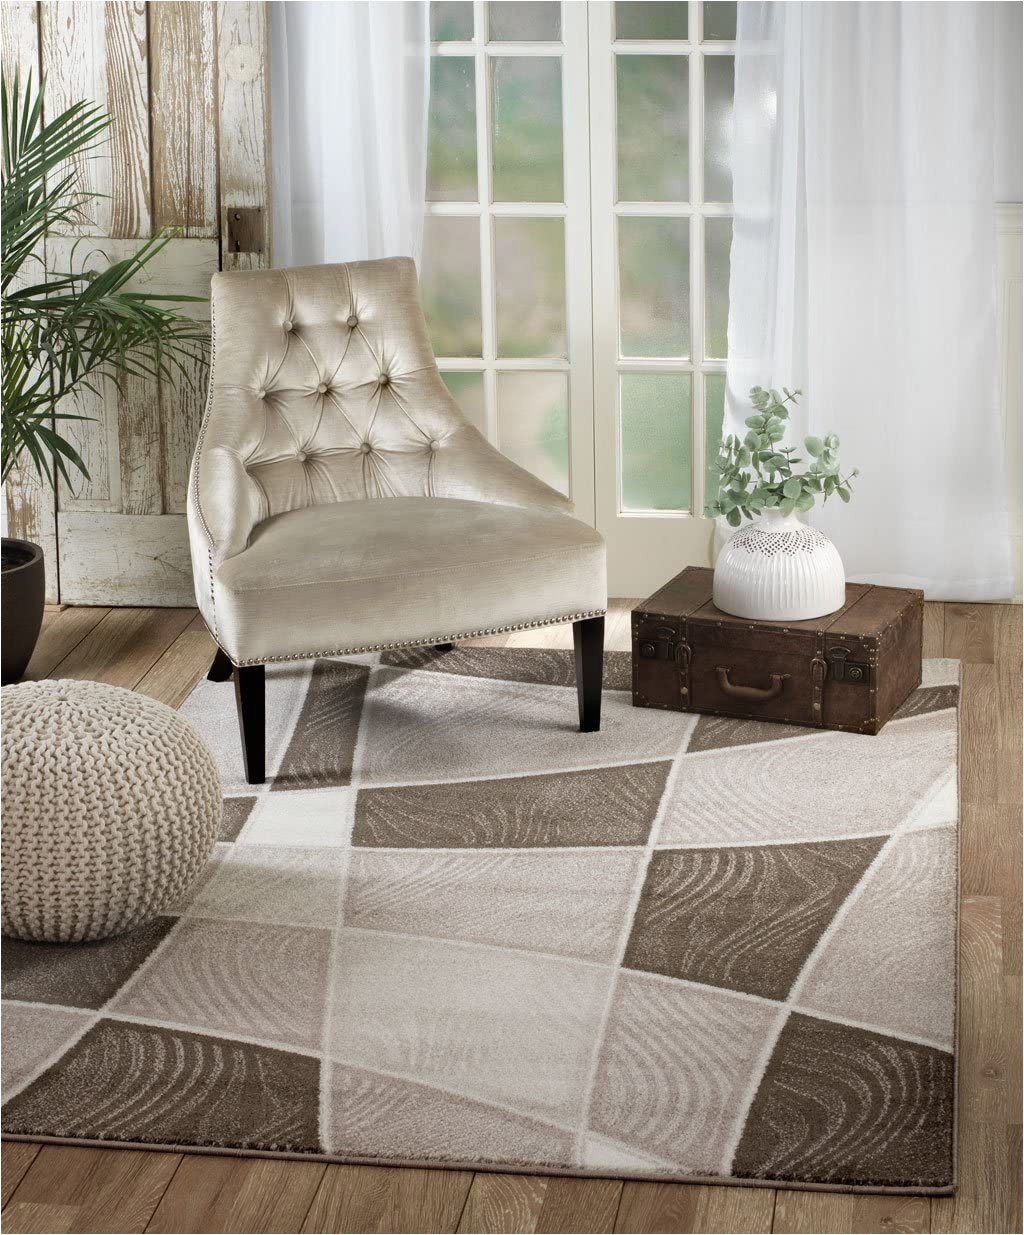 Taupe and Brown area Rug Rio Summit 303 Taupe Brown area Rug Modern Abstract Many Sizes Available 5 X 7 2" 5 X 7 2"